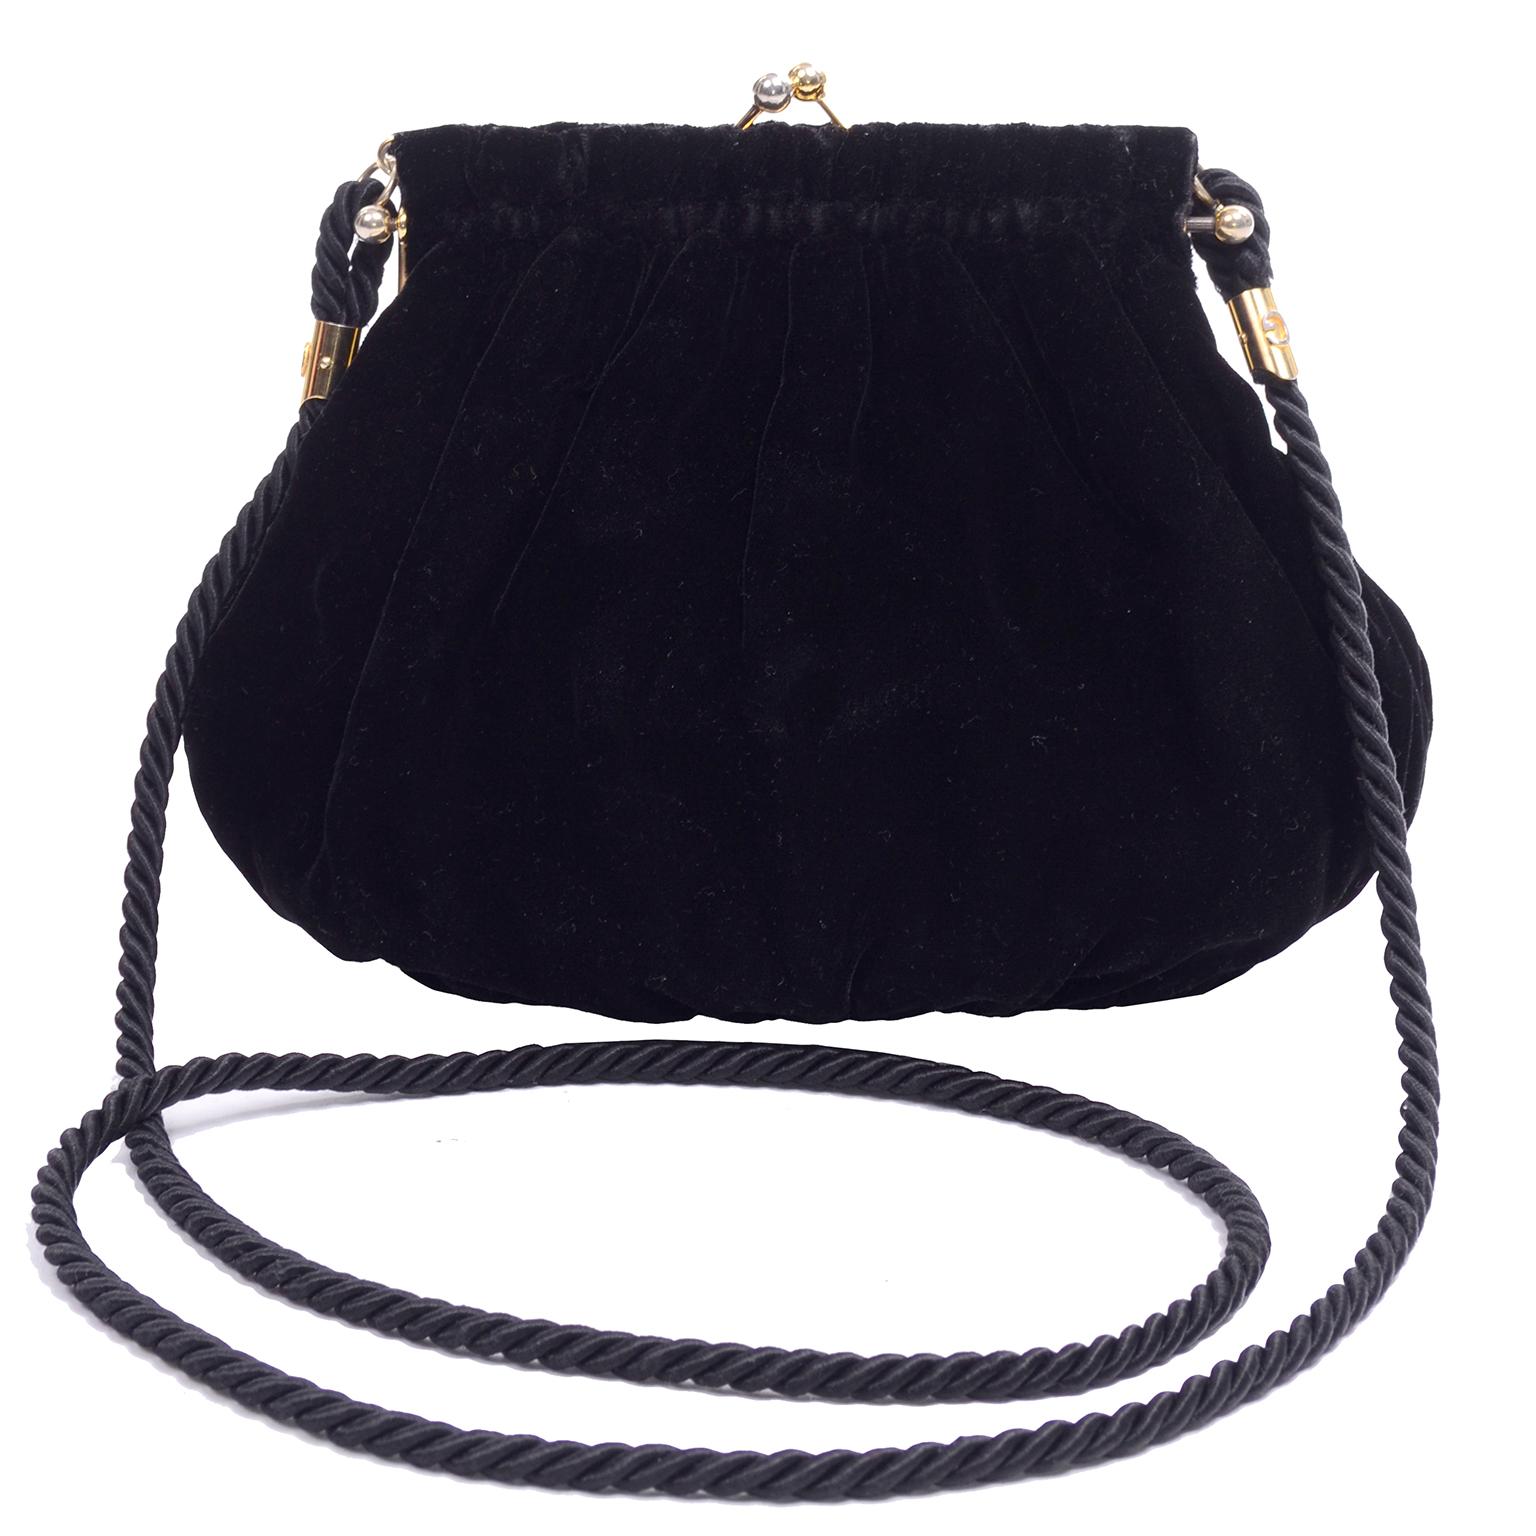 This is a lovely vintage handbag with a twisted rope shoulder strap from Gucci. The bag is in a luxurious black velvet and closes with a top kiss clasp.  There are two interior side pockets and the bag appears to have been only used once or twice at